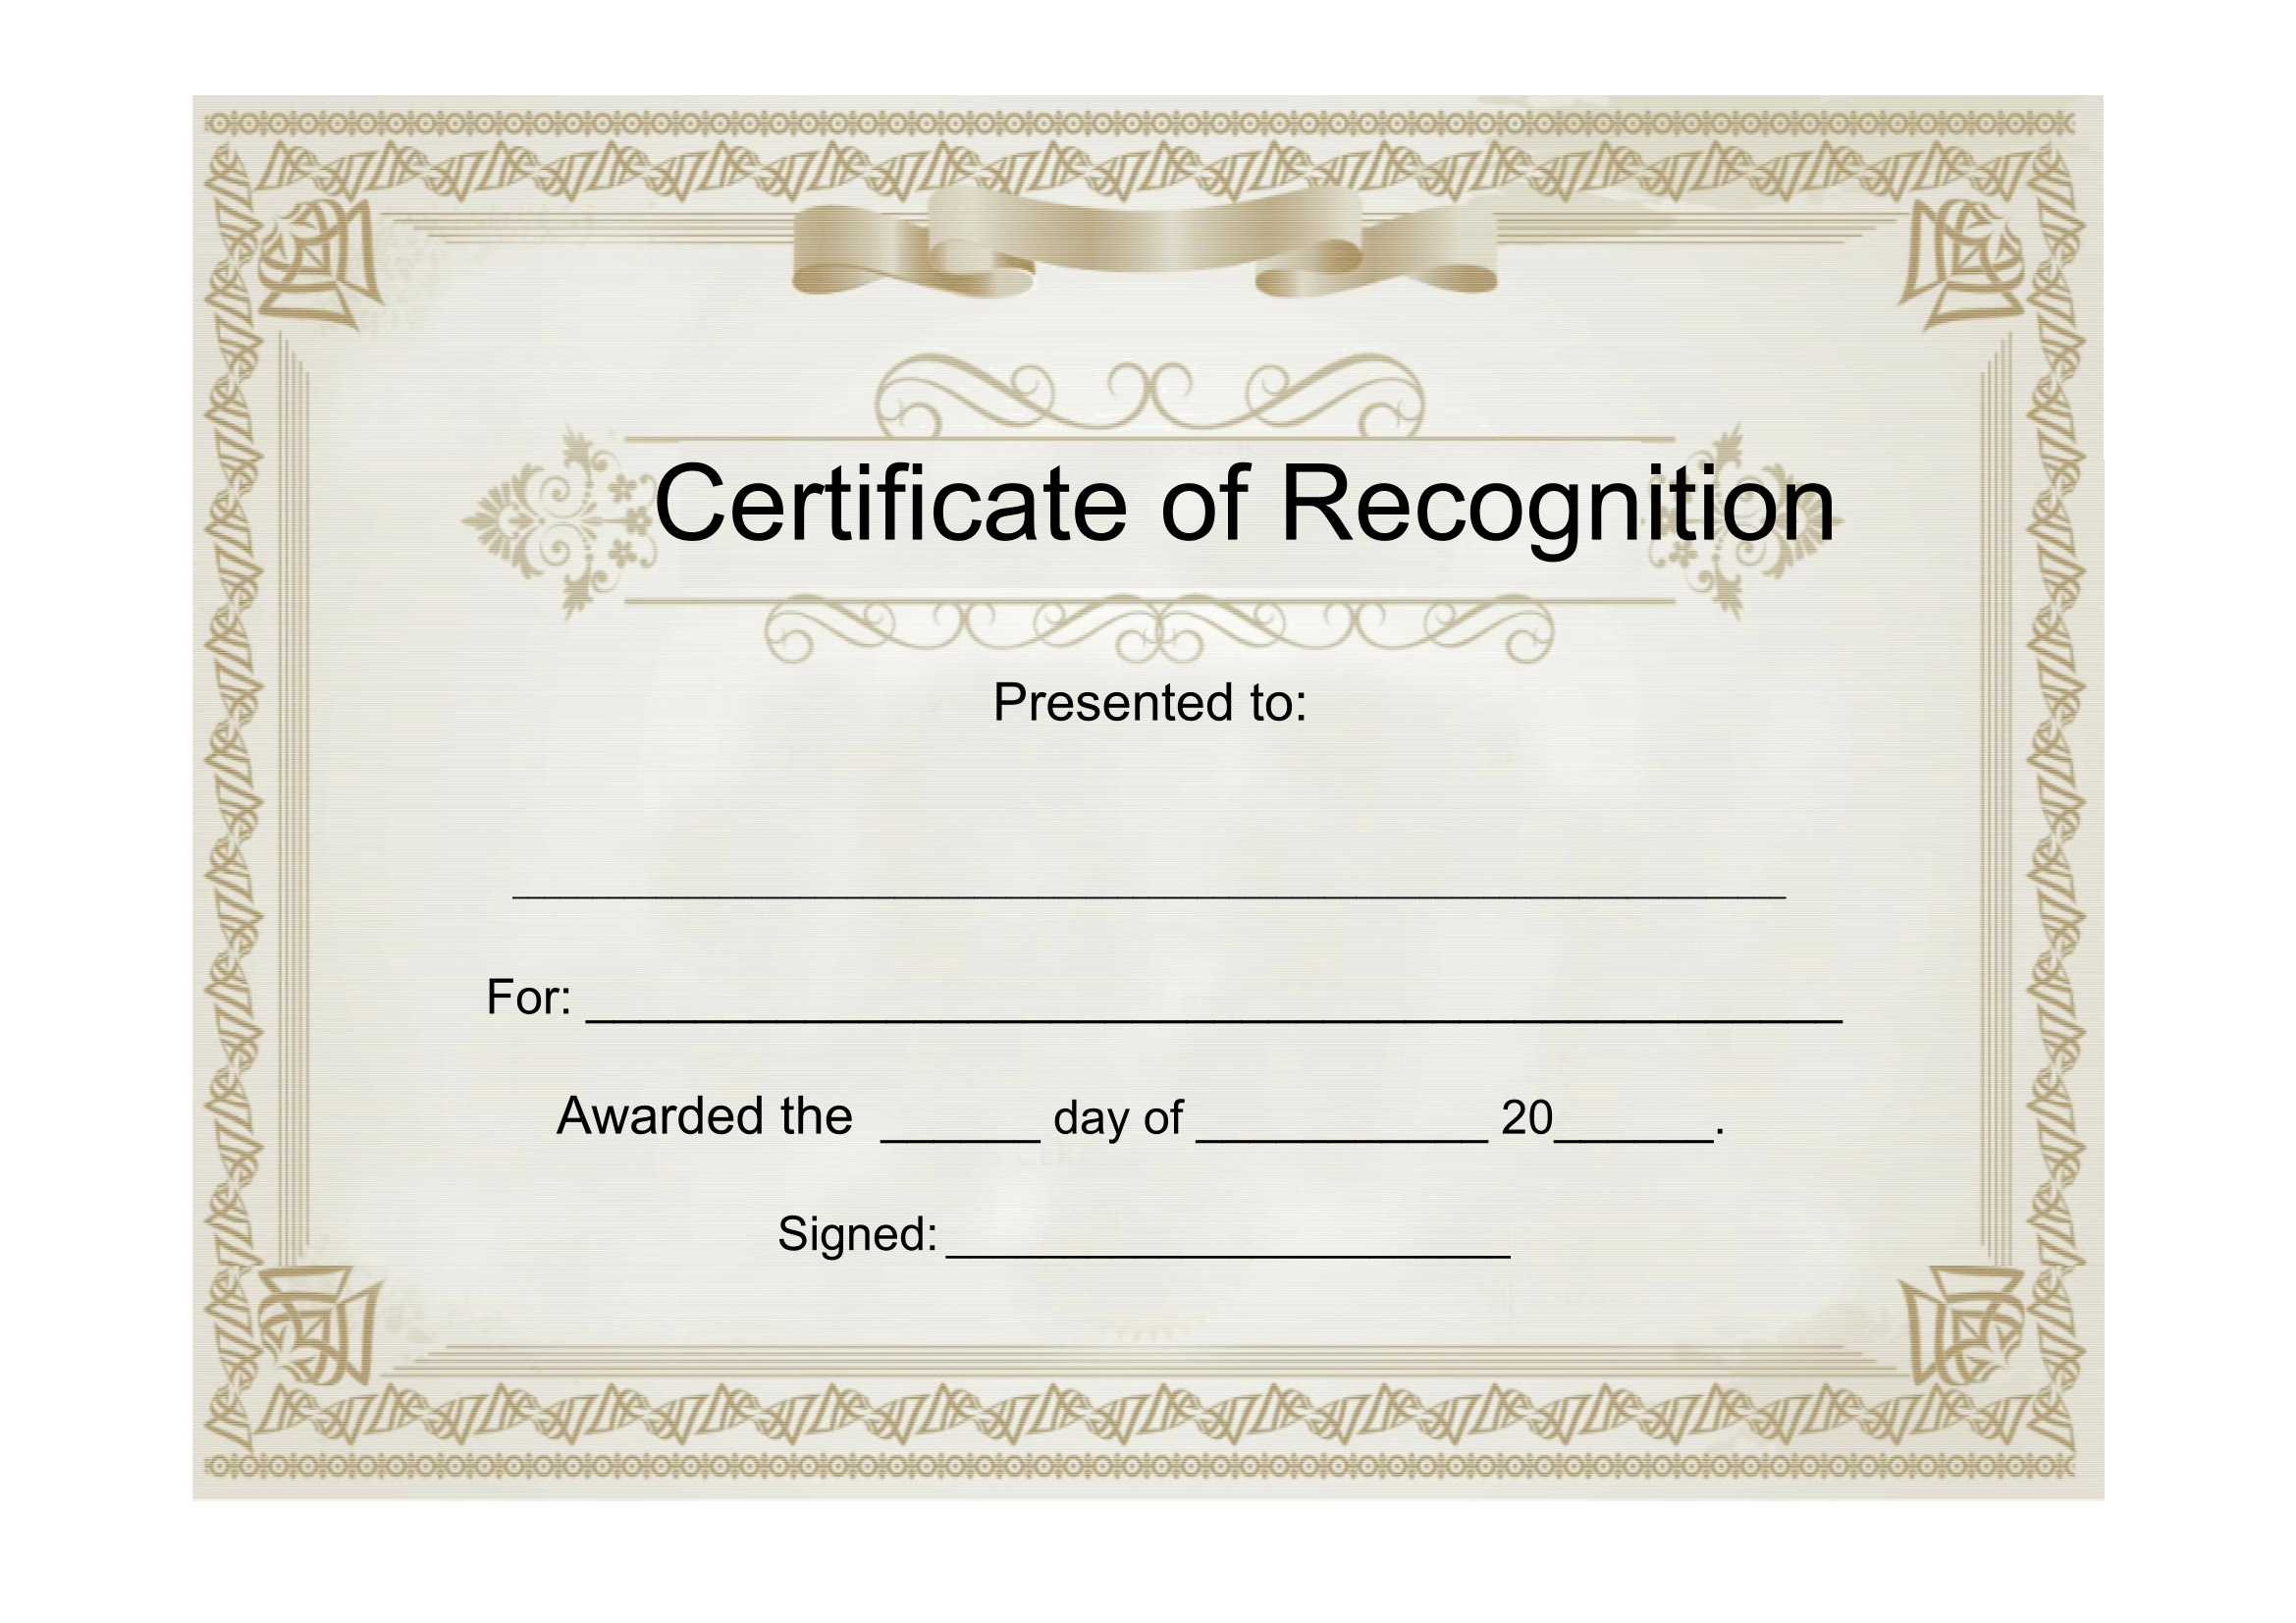 Sample Certificate Of Recognition – Free Download Template With Regard To Free Template For Certificate Of Recognition